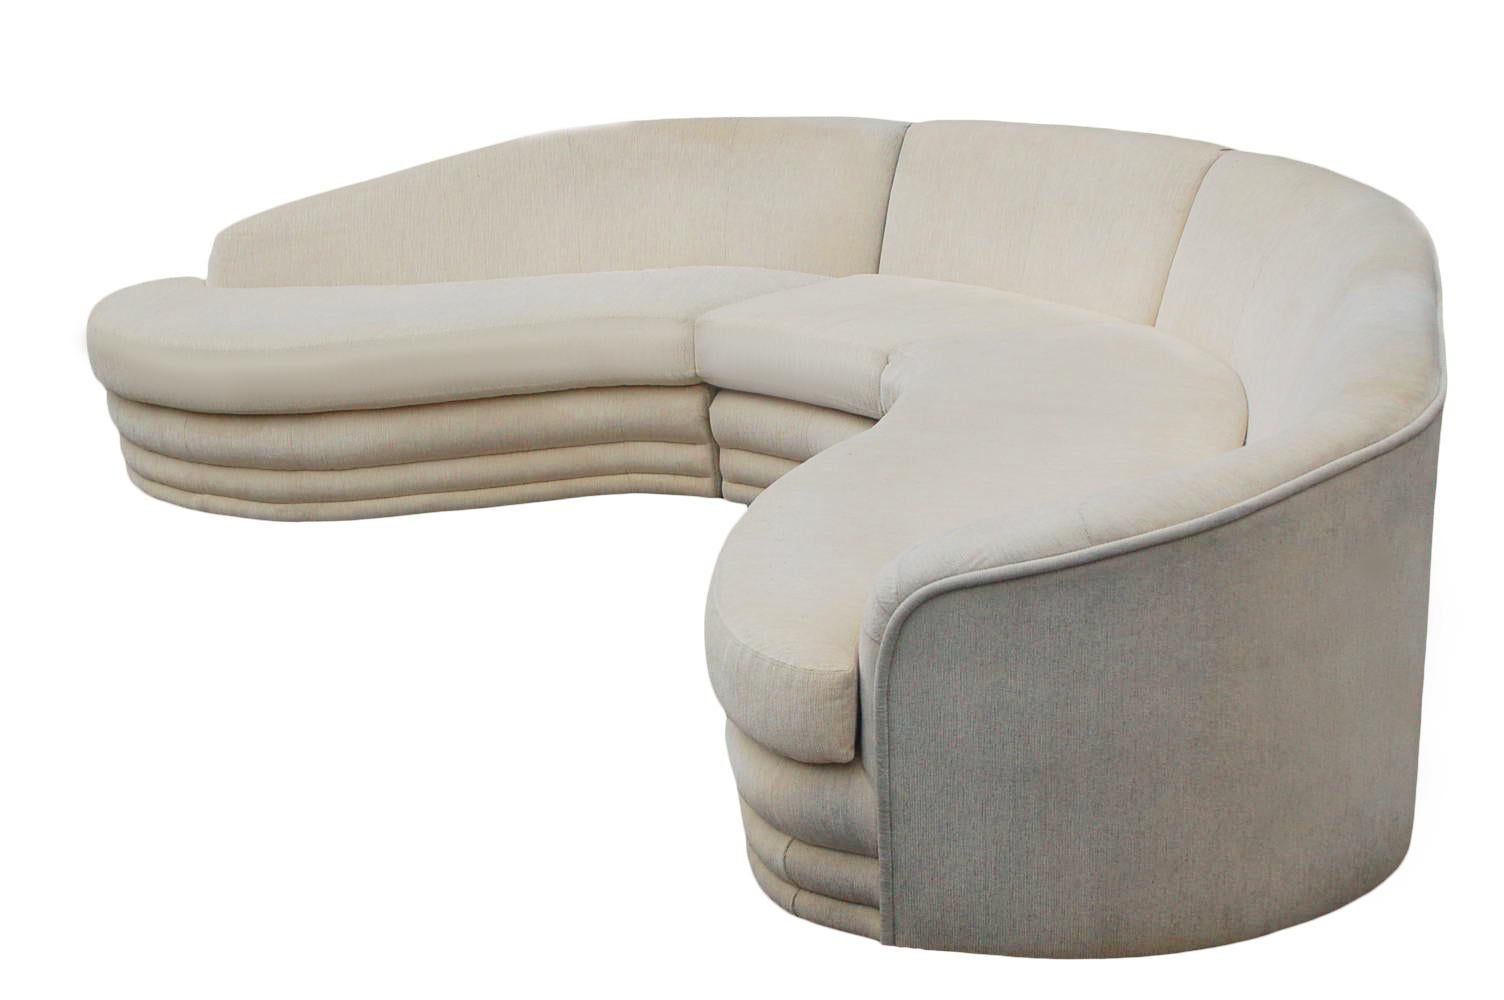 American Mid-Century Modern Curved Serpentine Sectional Sofa in Off-White Velour